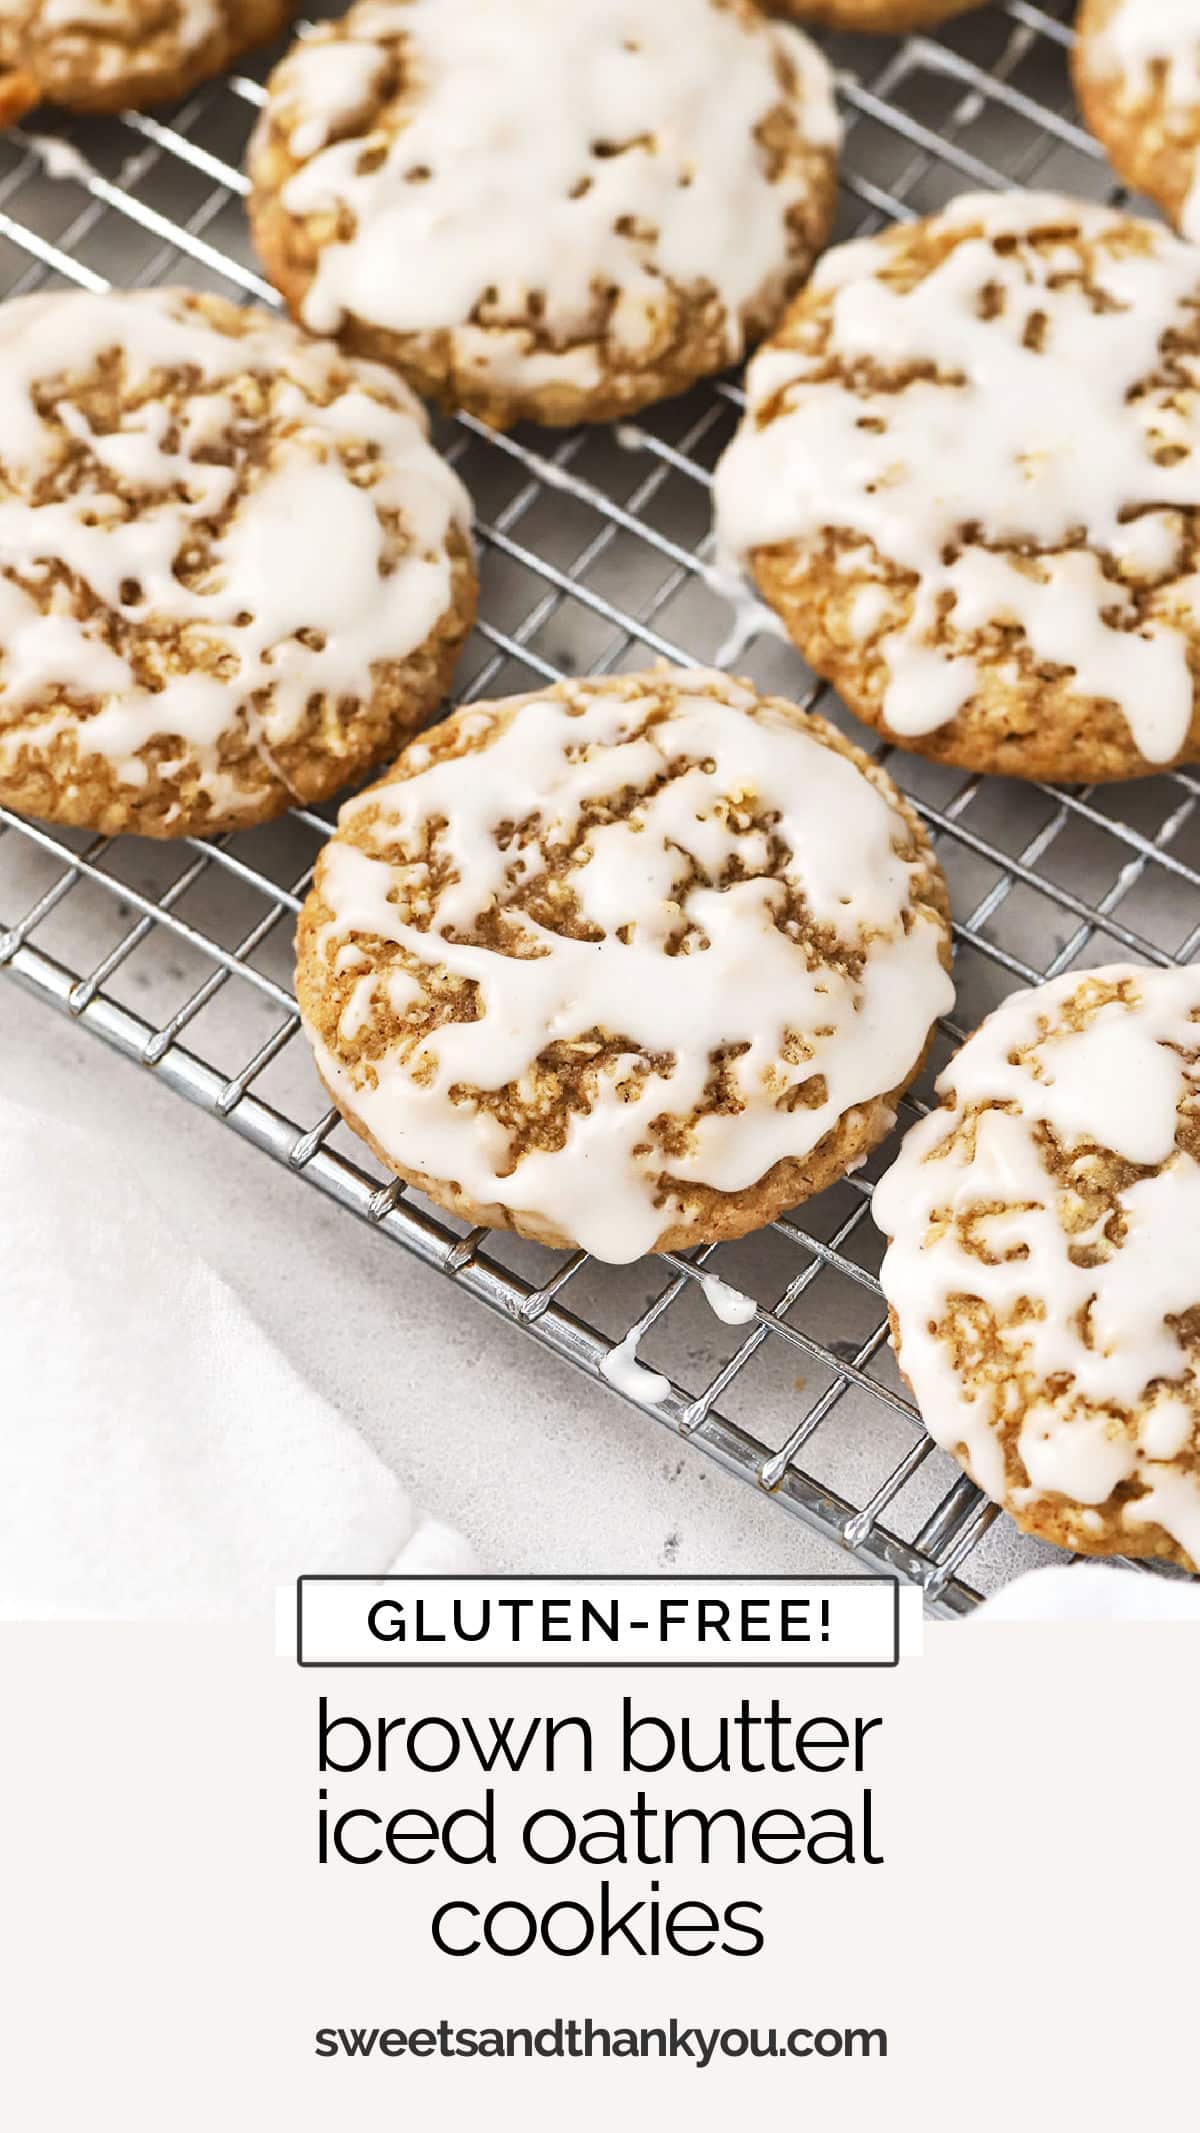 These gluten-free iced oatmeal cookies are made with brown butter, warm spices, and a simple sweet glaze. They're cookie perfection! / gluten free oatmeal cookies / gluten-free christmas cookies / gluten free holiday cookies / gluten free spice cookies / gluten free glazed oatmeal cookies / brown butter oatmeal cookies recipe / gluten free cookies with glaze / gluten free old fashioned iced oatmeal cookies / gluten free cinnamon cookies